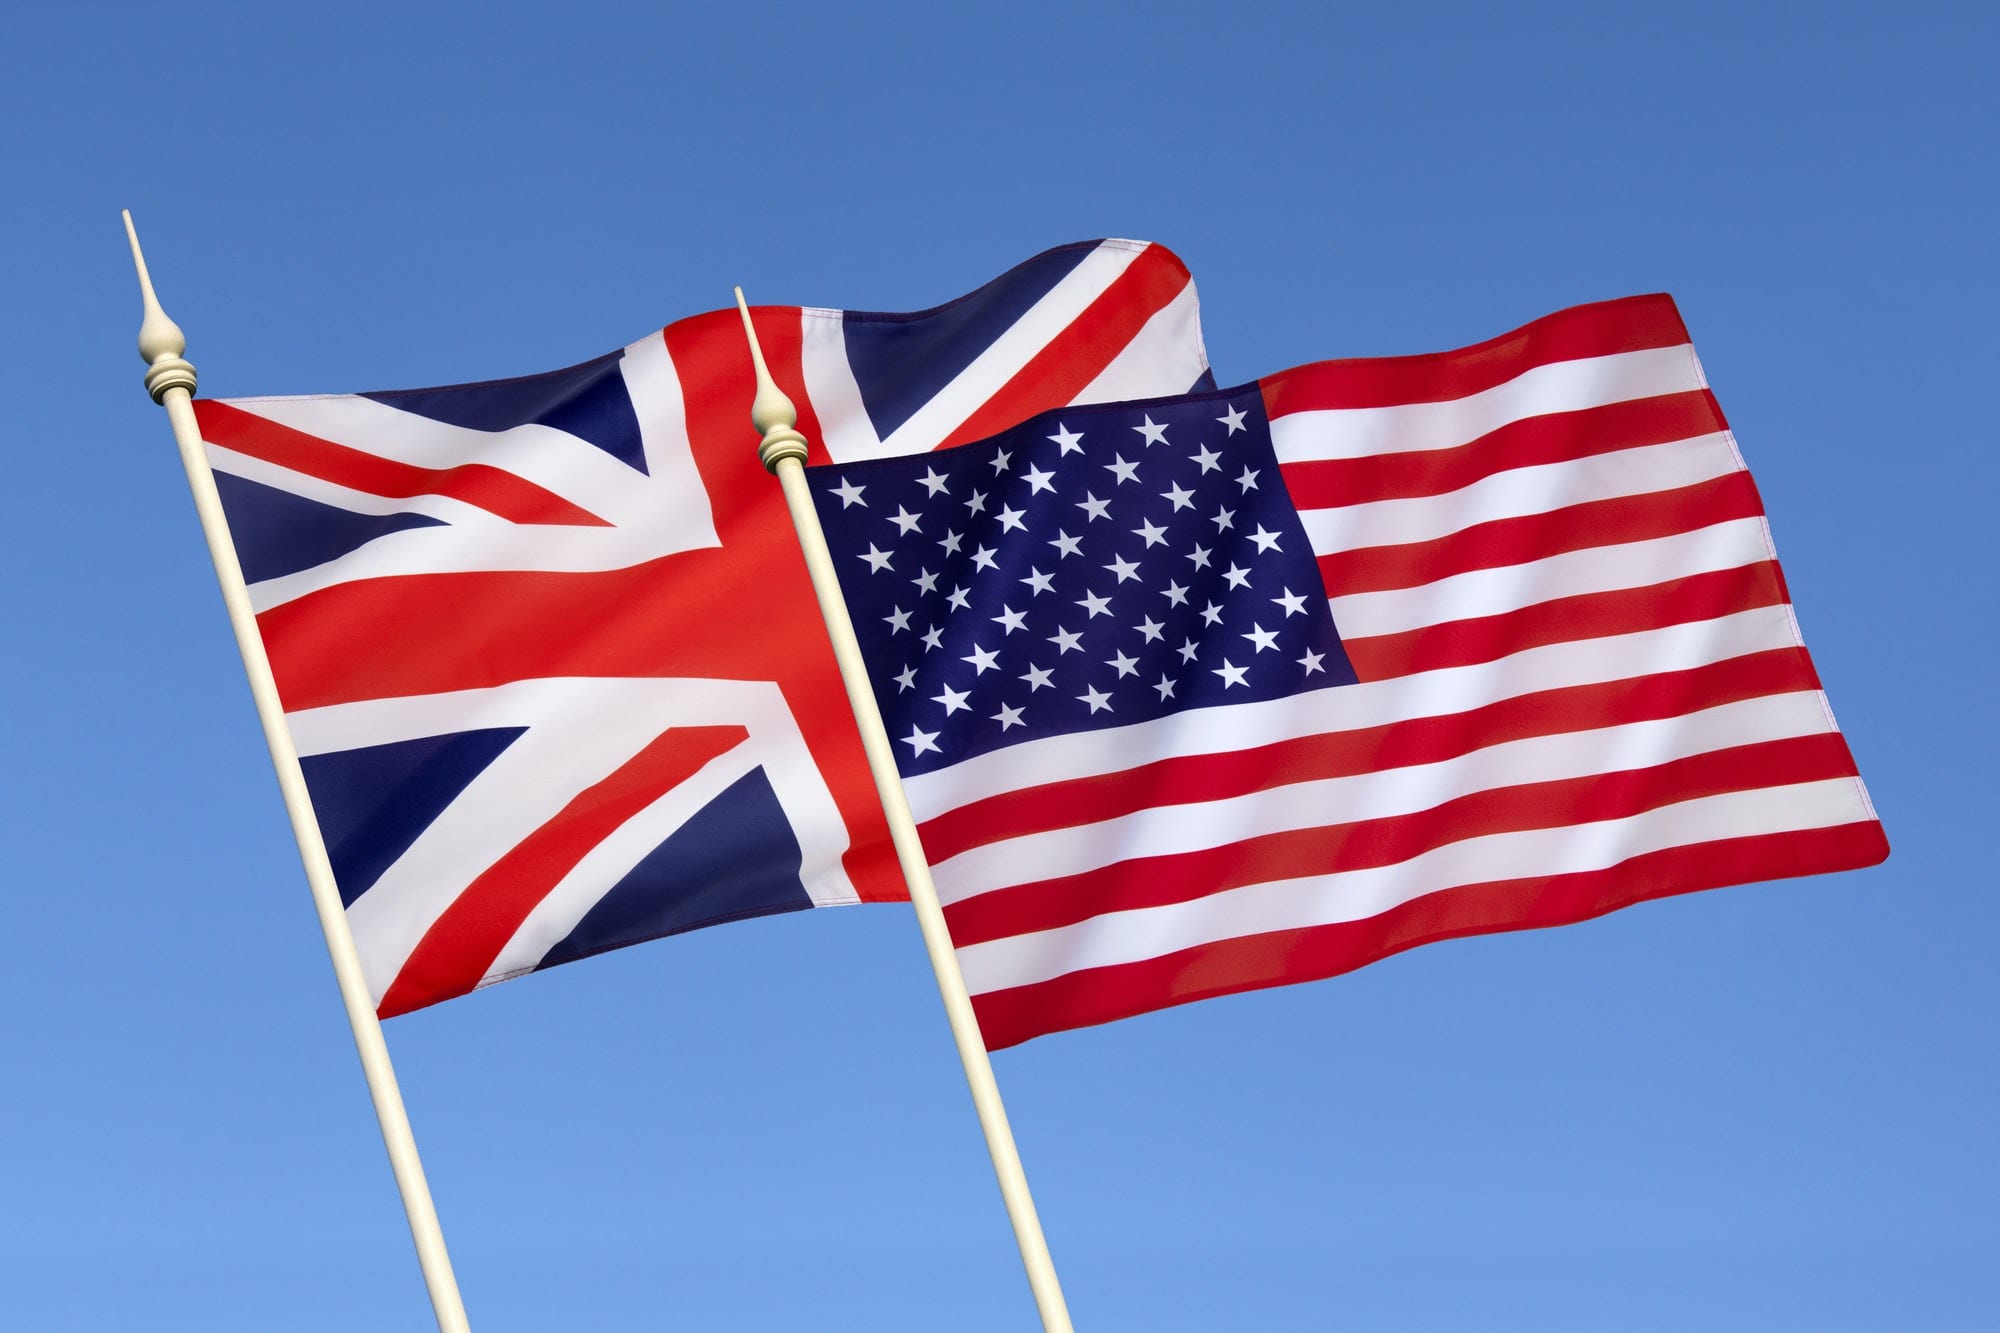 Flags of the United States and Great Britain